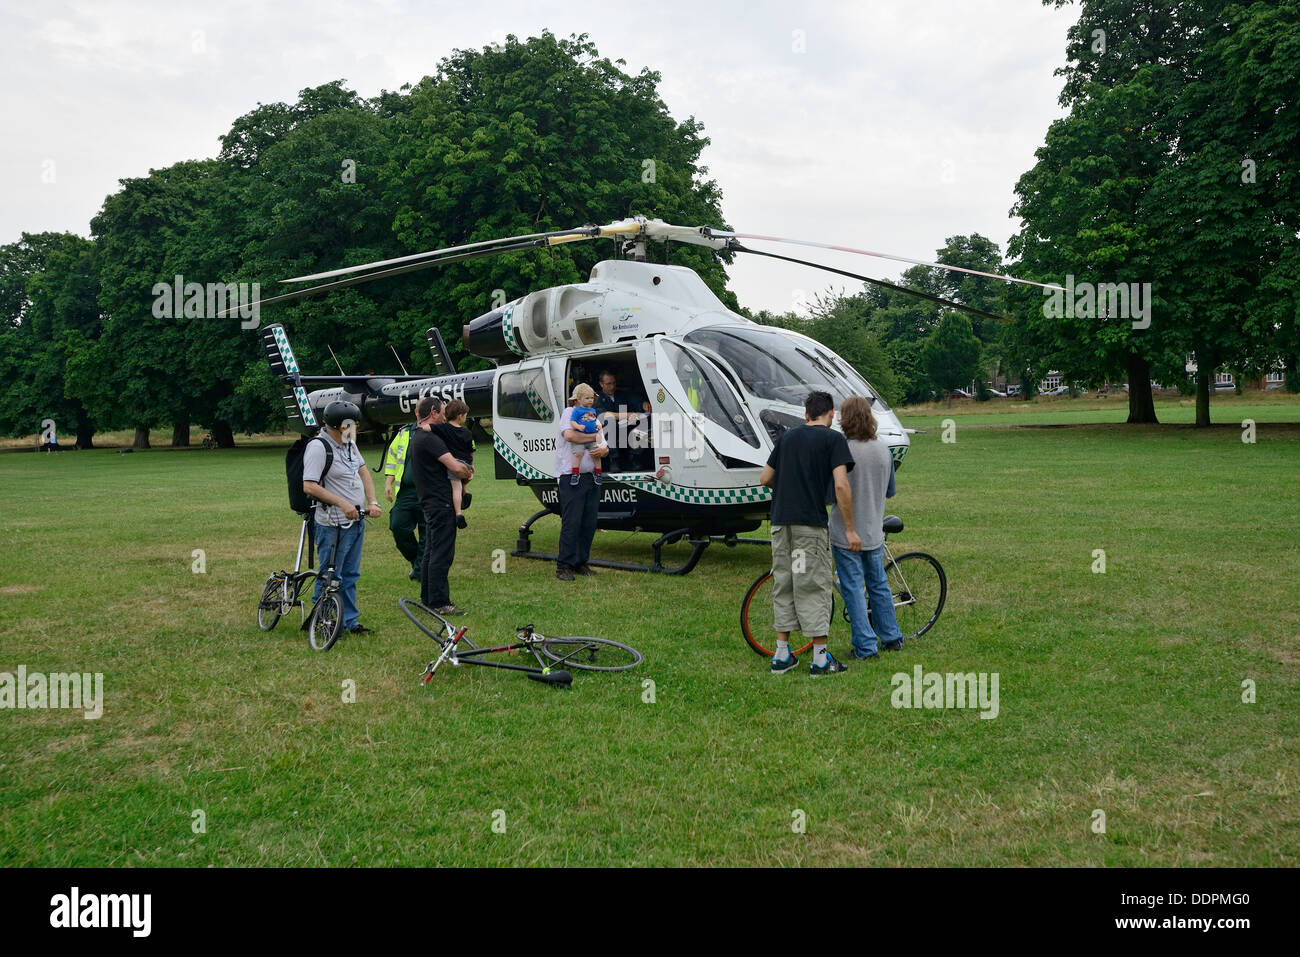 Emergency services helicopter in one of many London parks Stock Photo